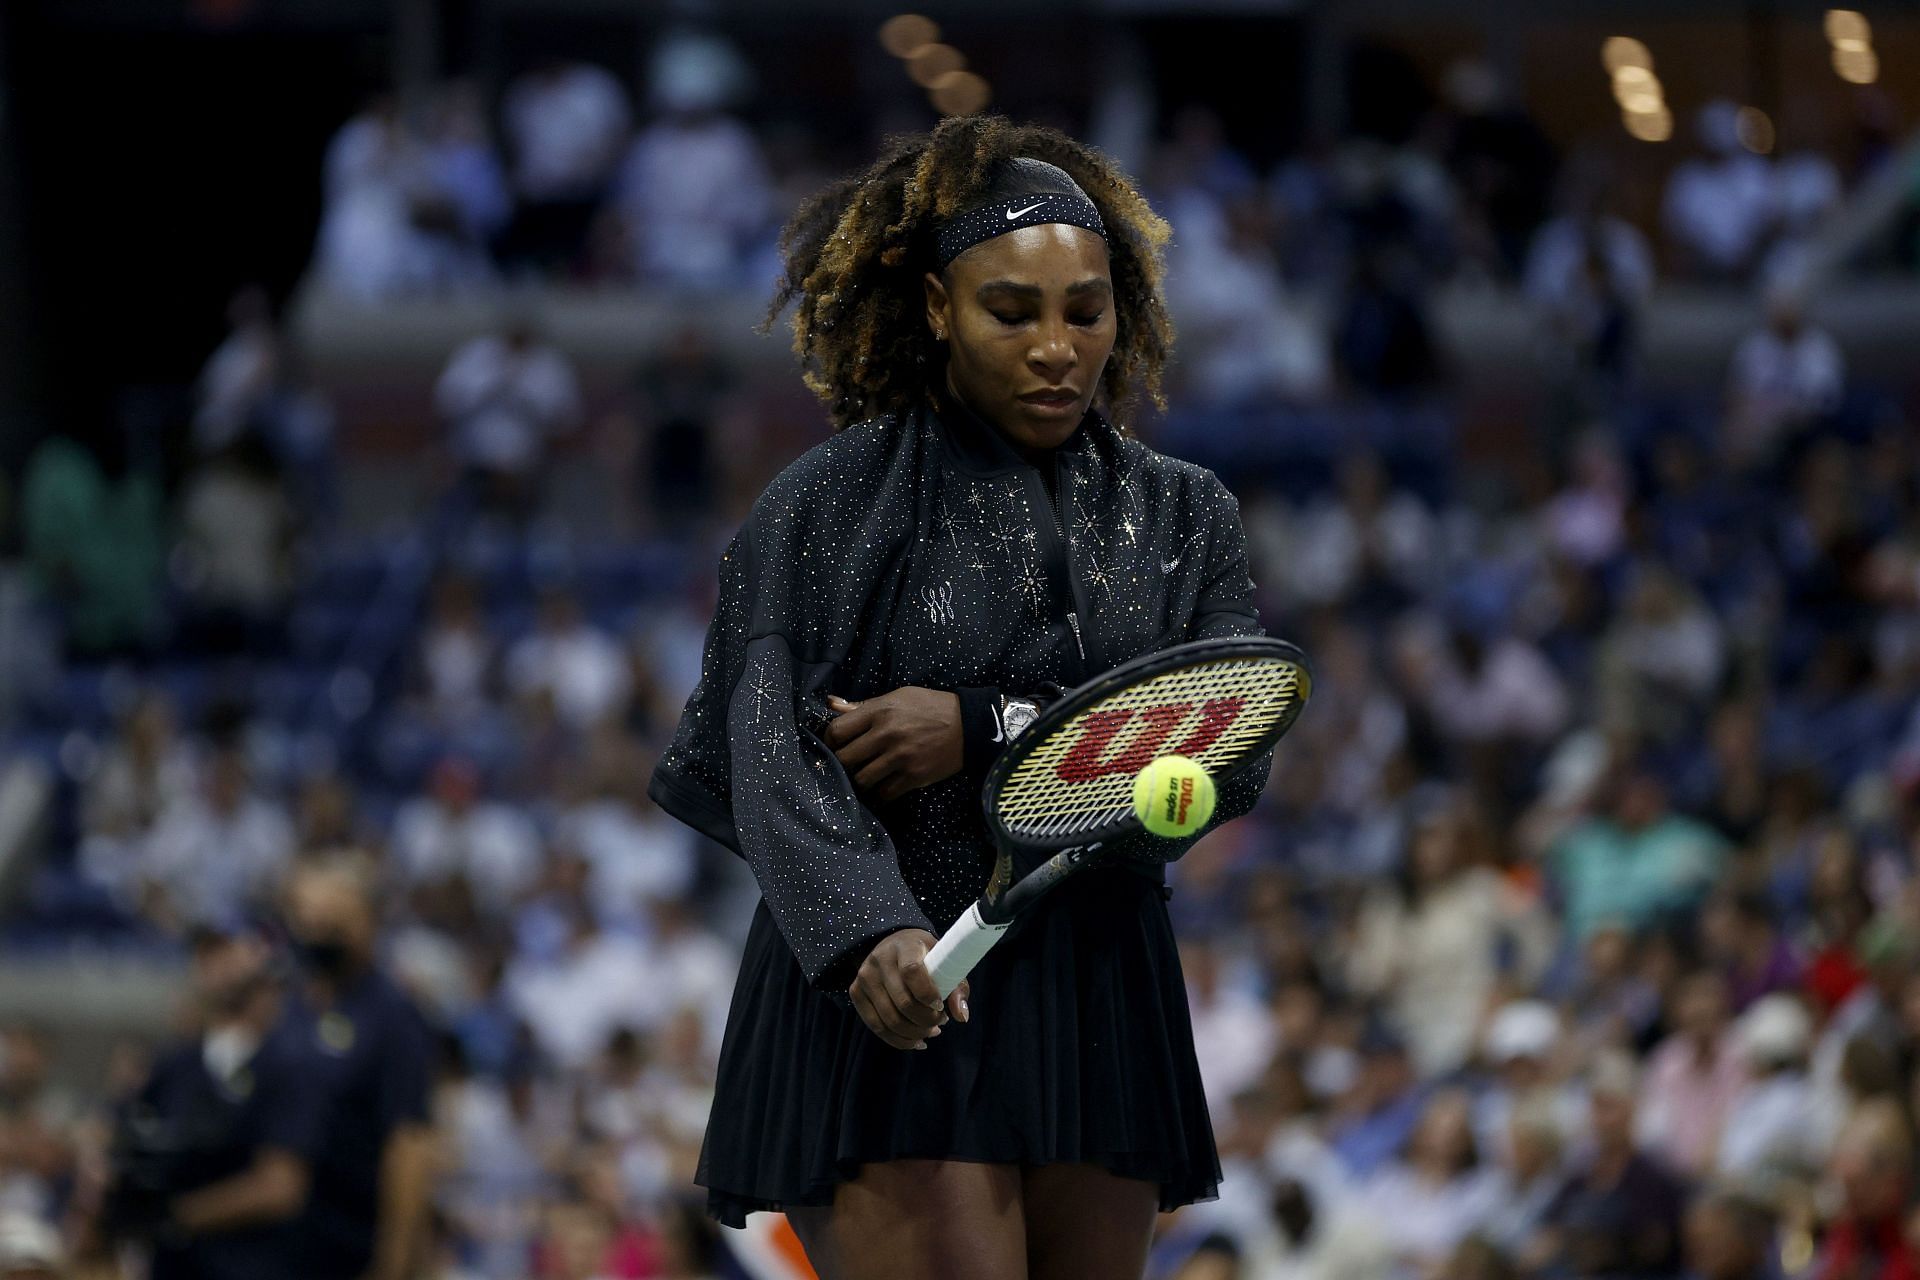 Serena Williams during her match against Ajla Tomlijanovic at the 2022 US Open - Day 5